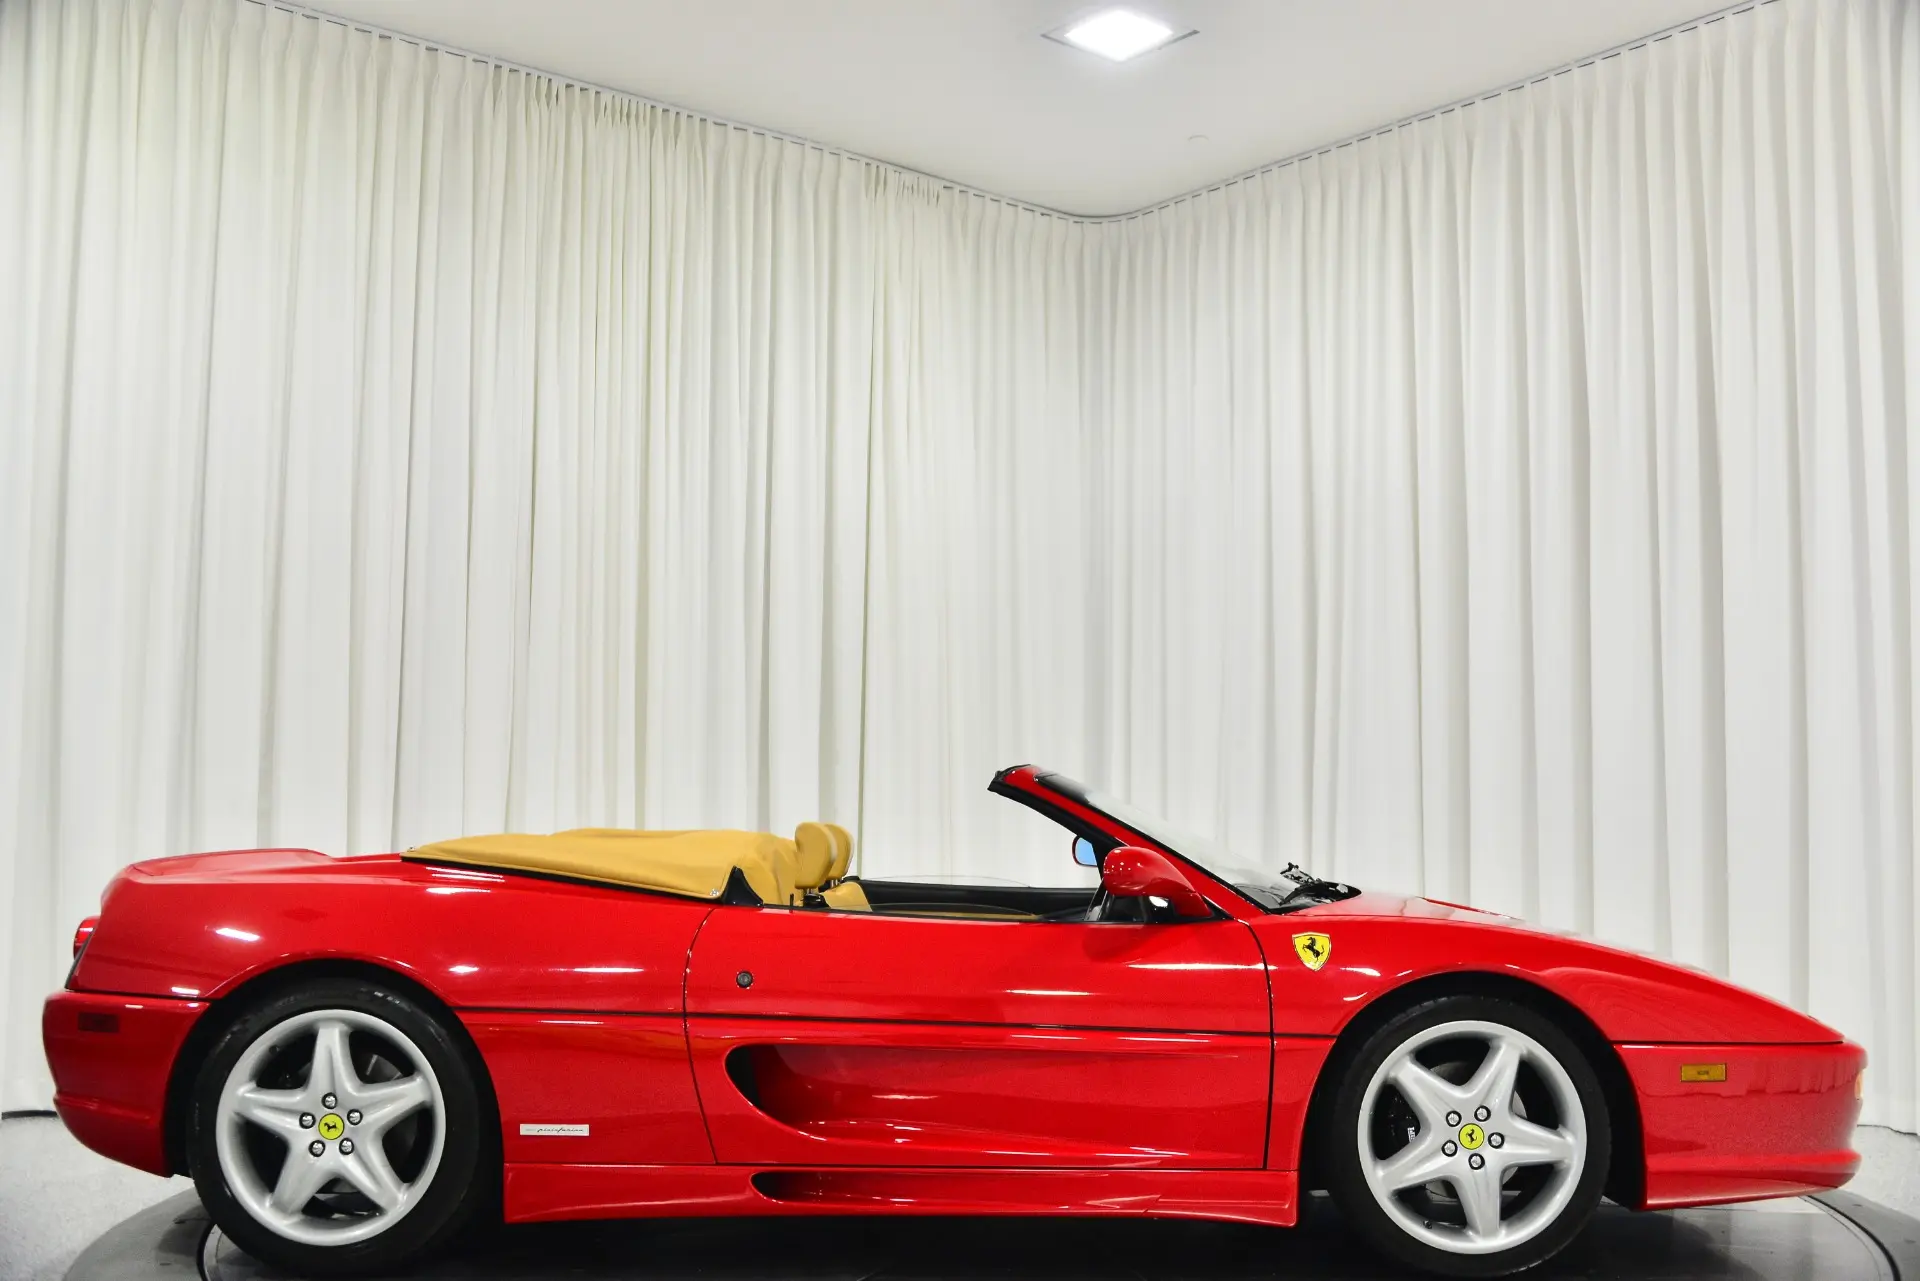 ferrari 355 spider for sale - What is the top speed of a 1996 Ferrari F355 Spider